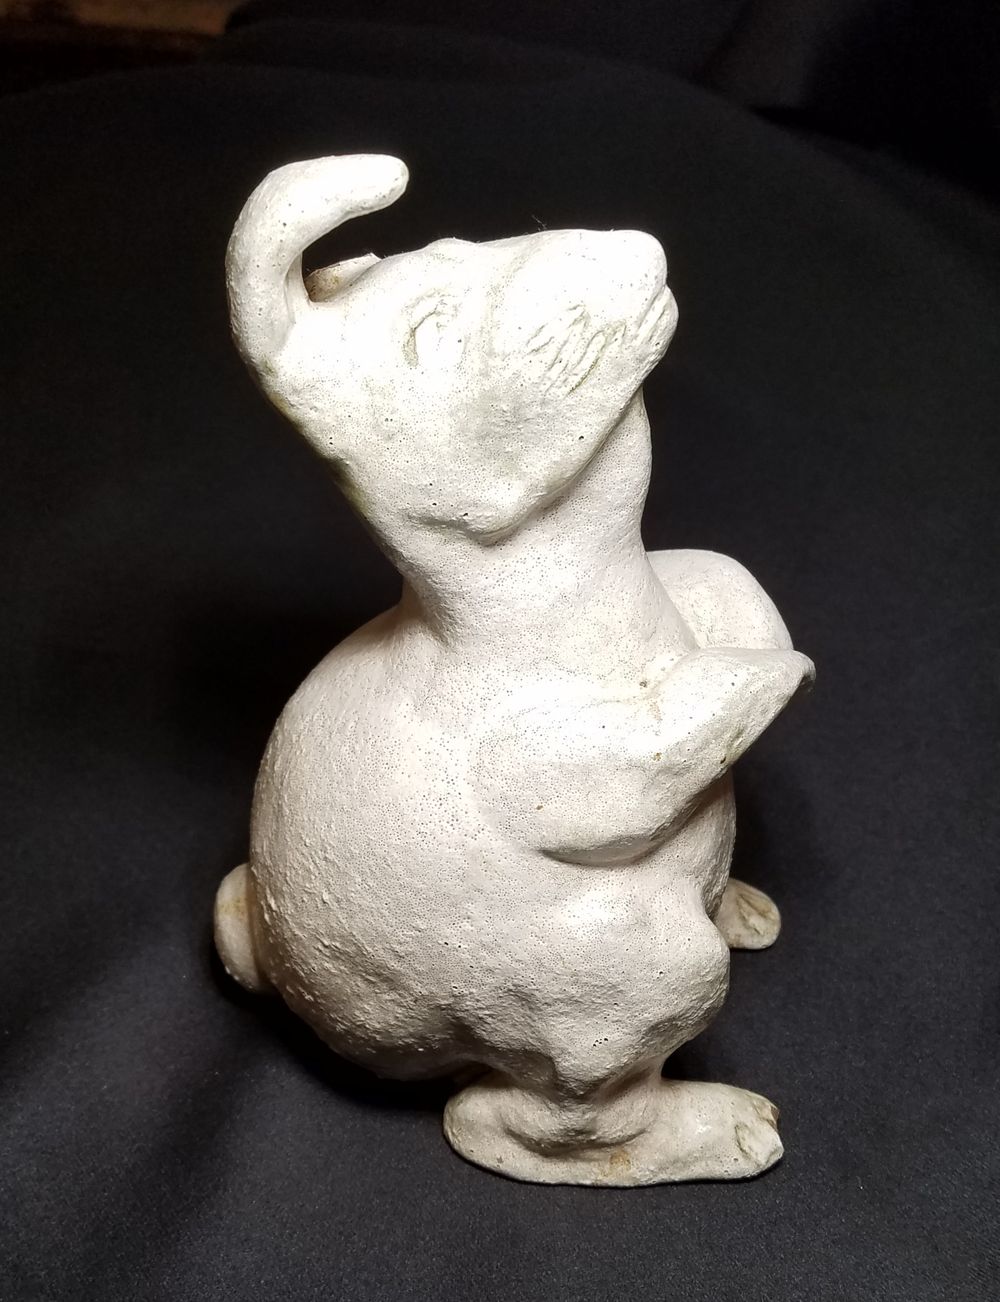 Sculpted by Tracy Lee Nelson at the age of 6, My Easter Rabbit 